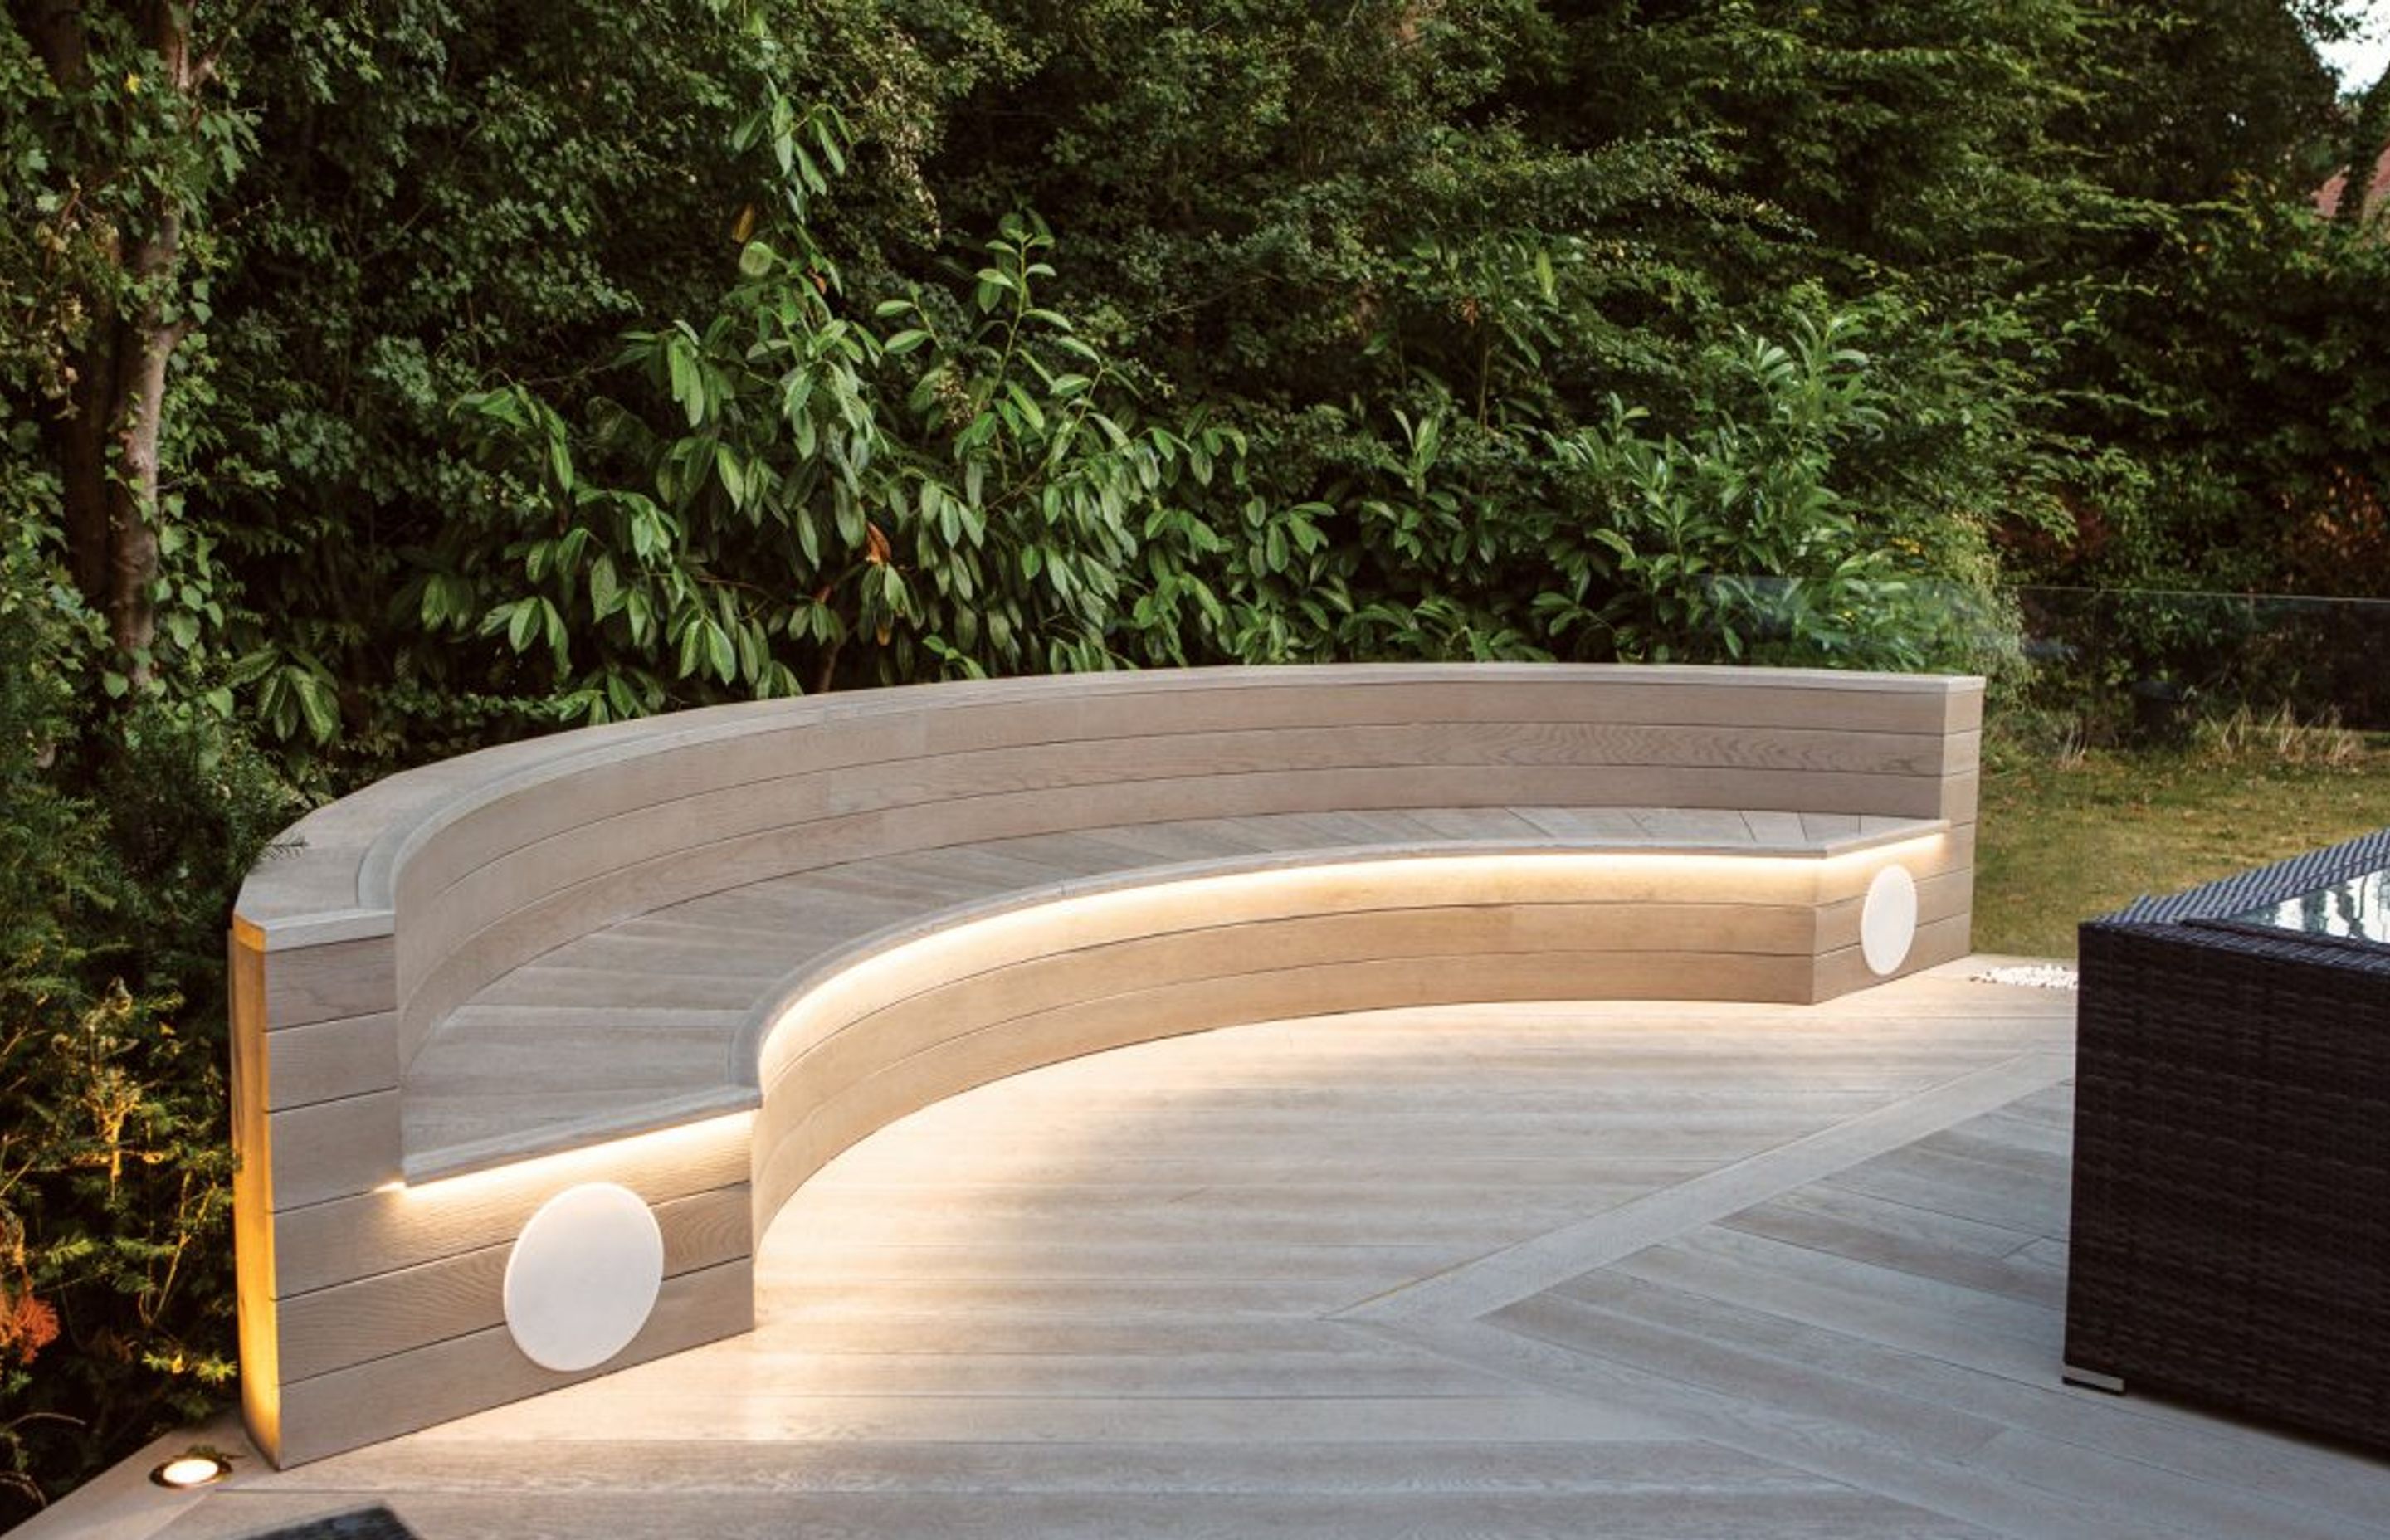 Seating design featuring Millboard's Smoked Oak decking boards and flexible bullnose edging